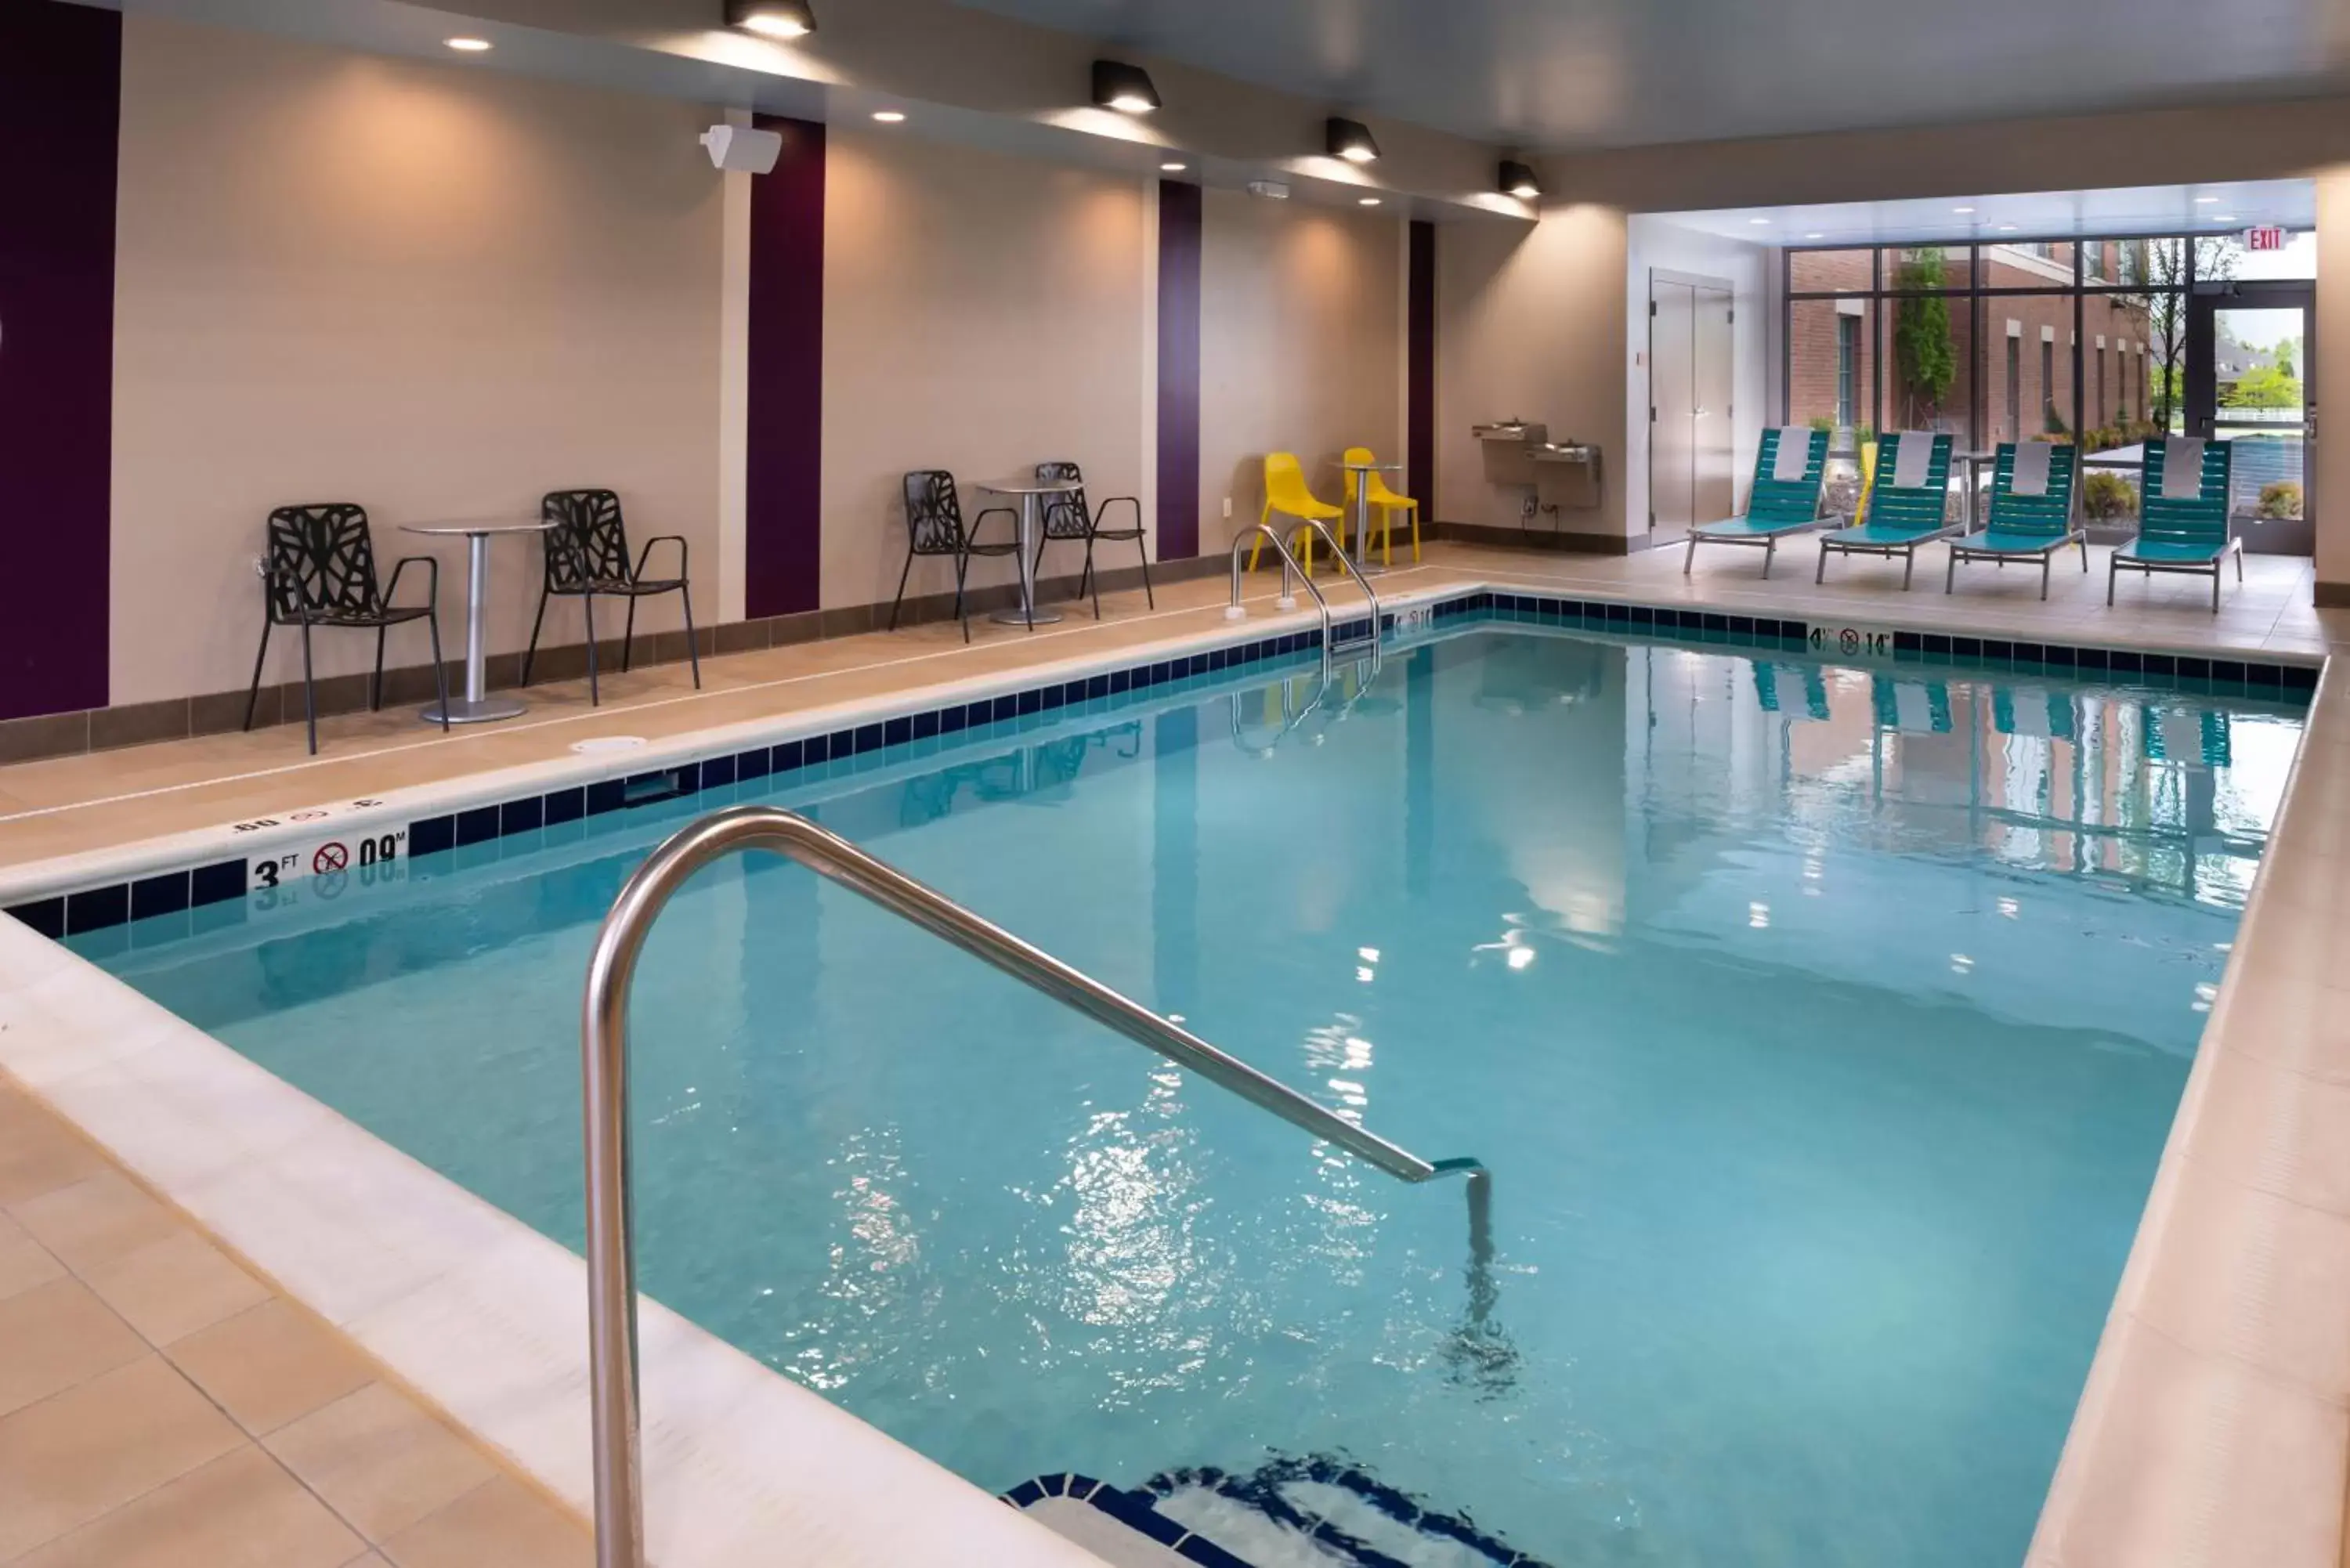 Swimming Pool in Home2 Suites By Hilton Columbus/West, OH